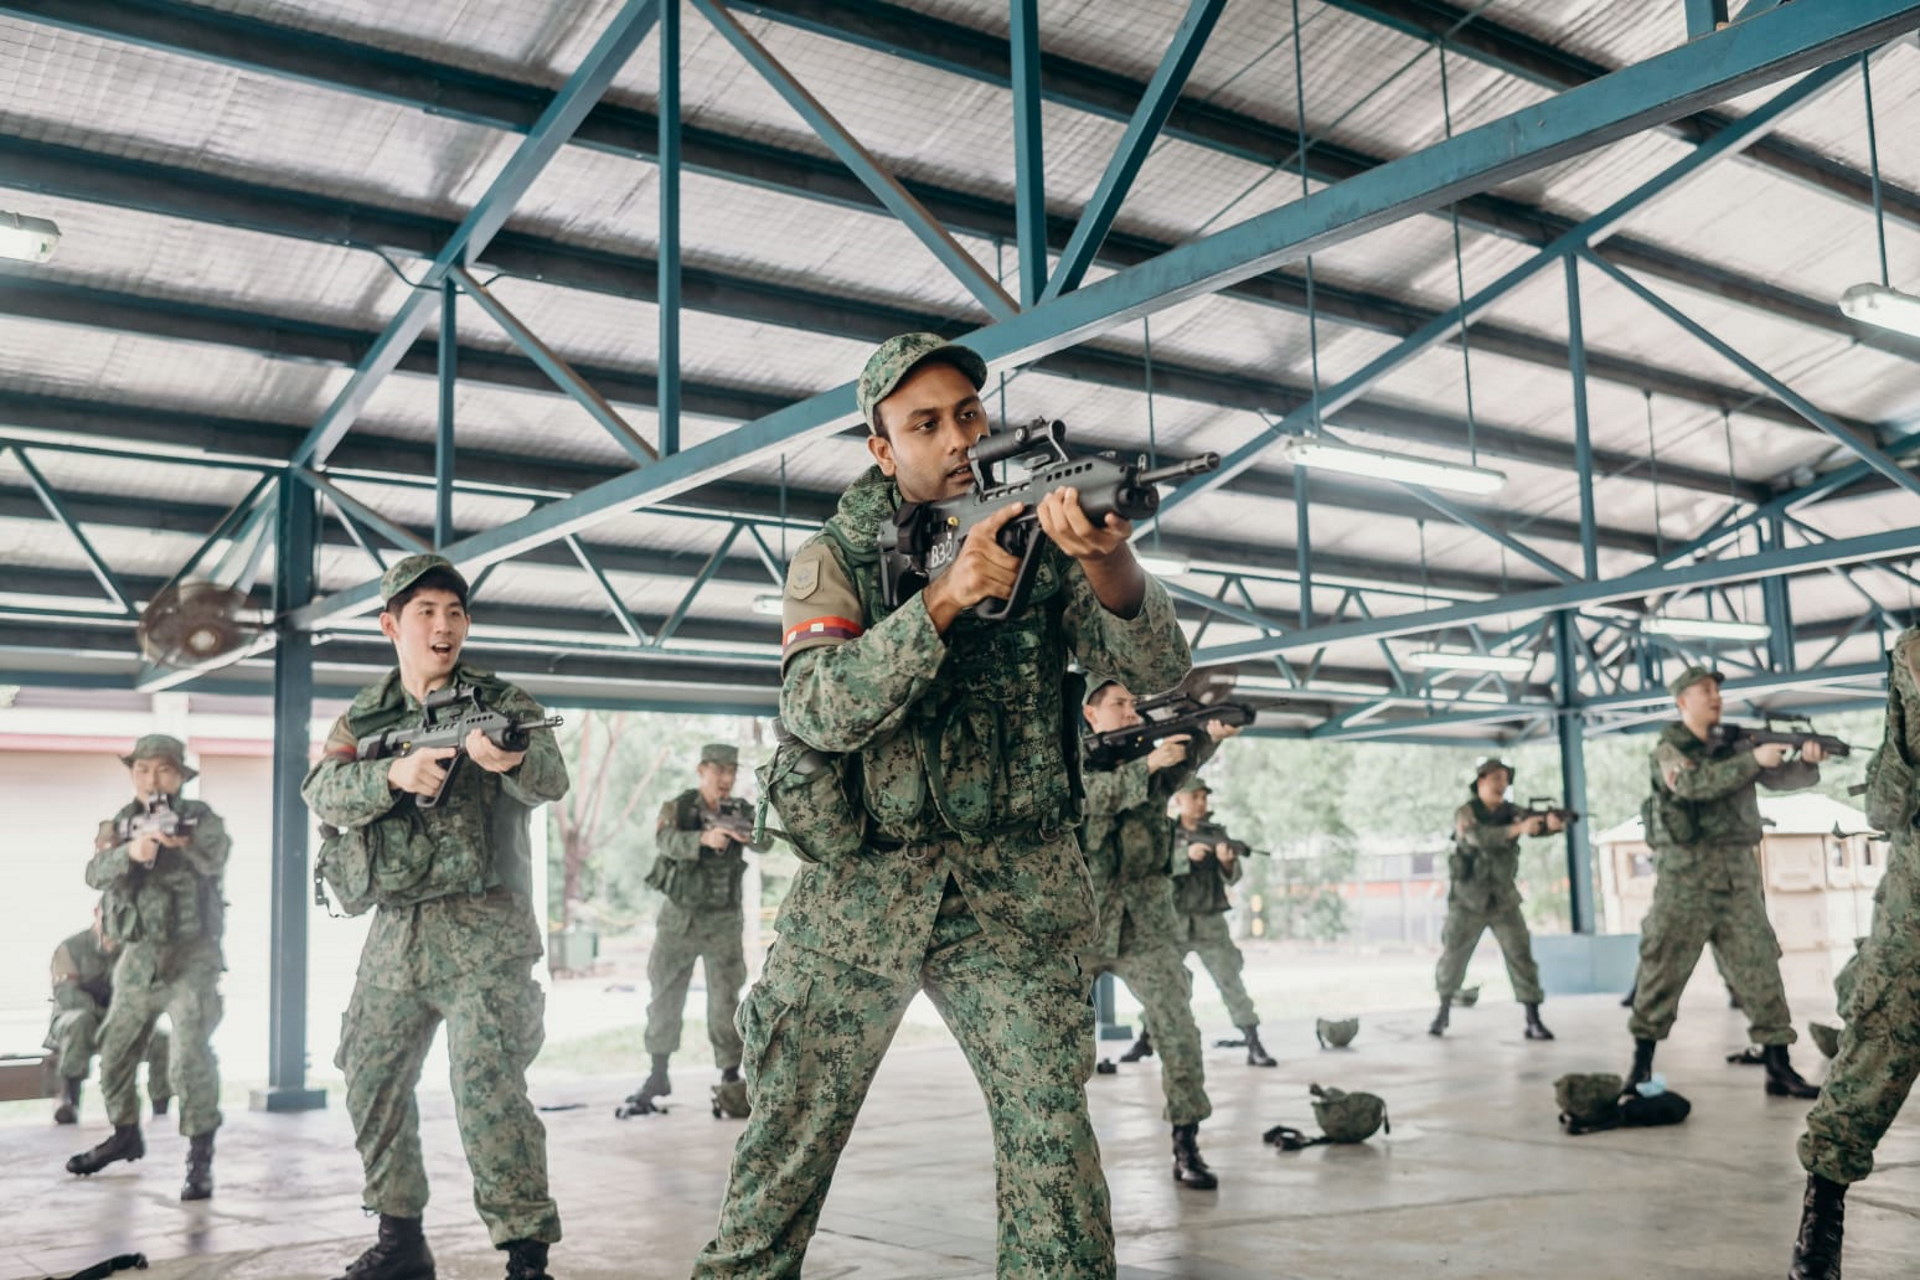 How the men of 735 Gds guarded Jurong Island amid COVID-19